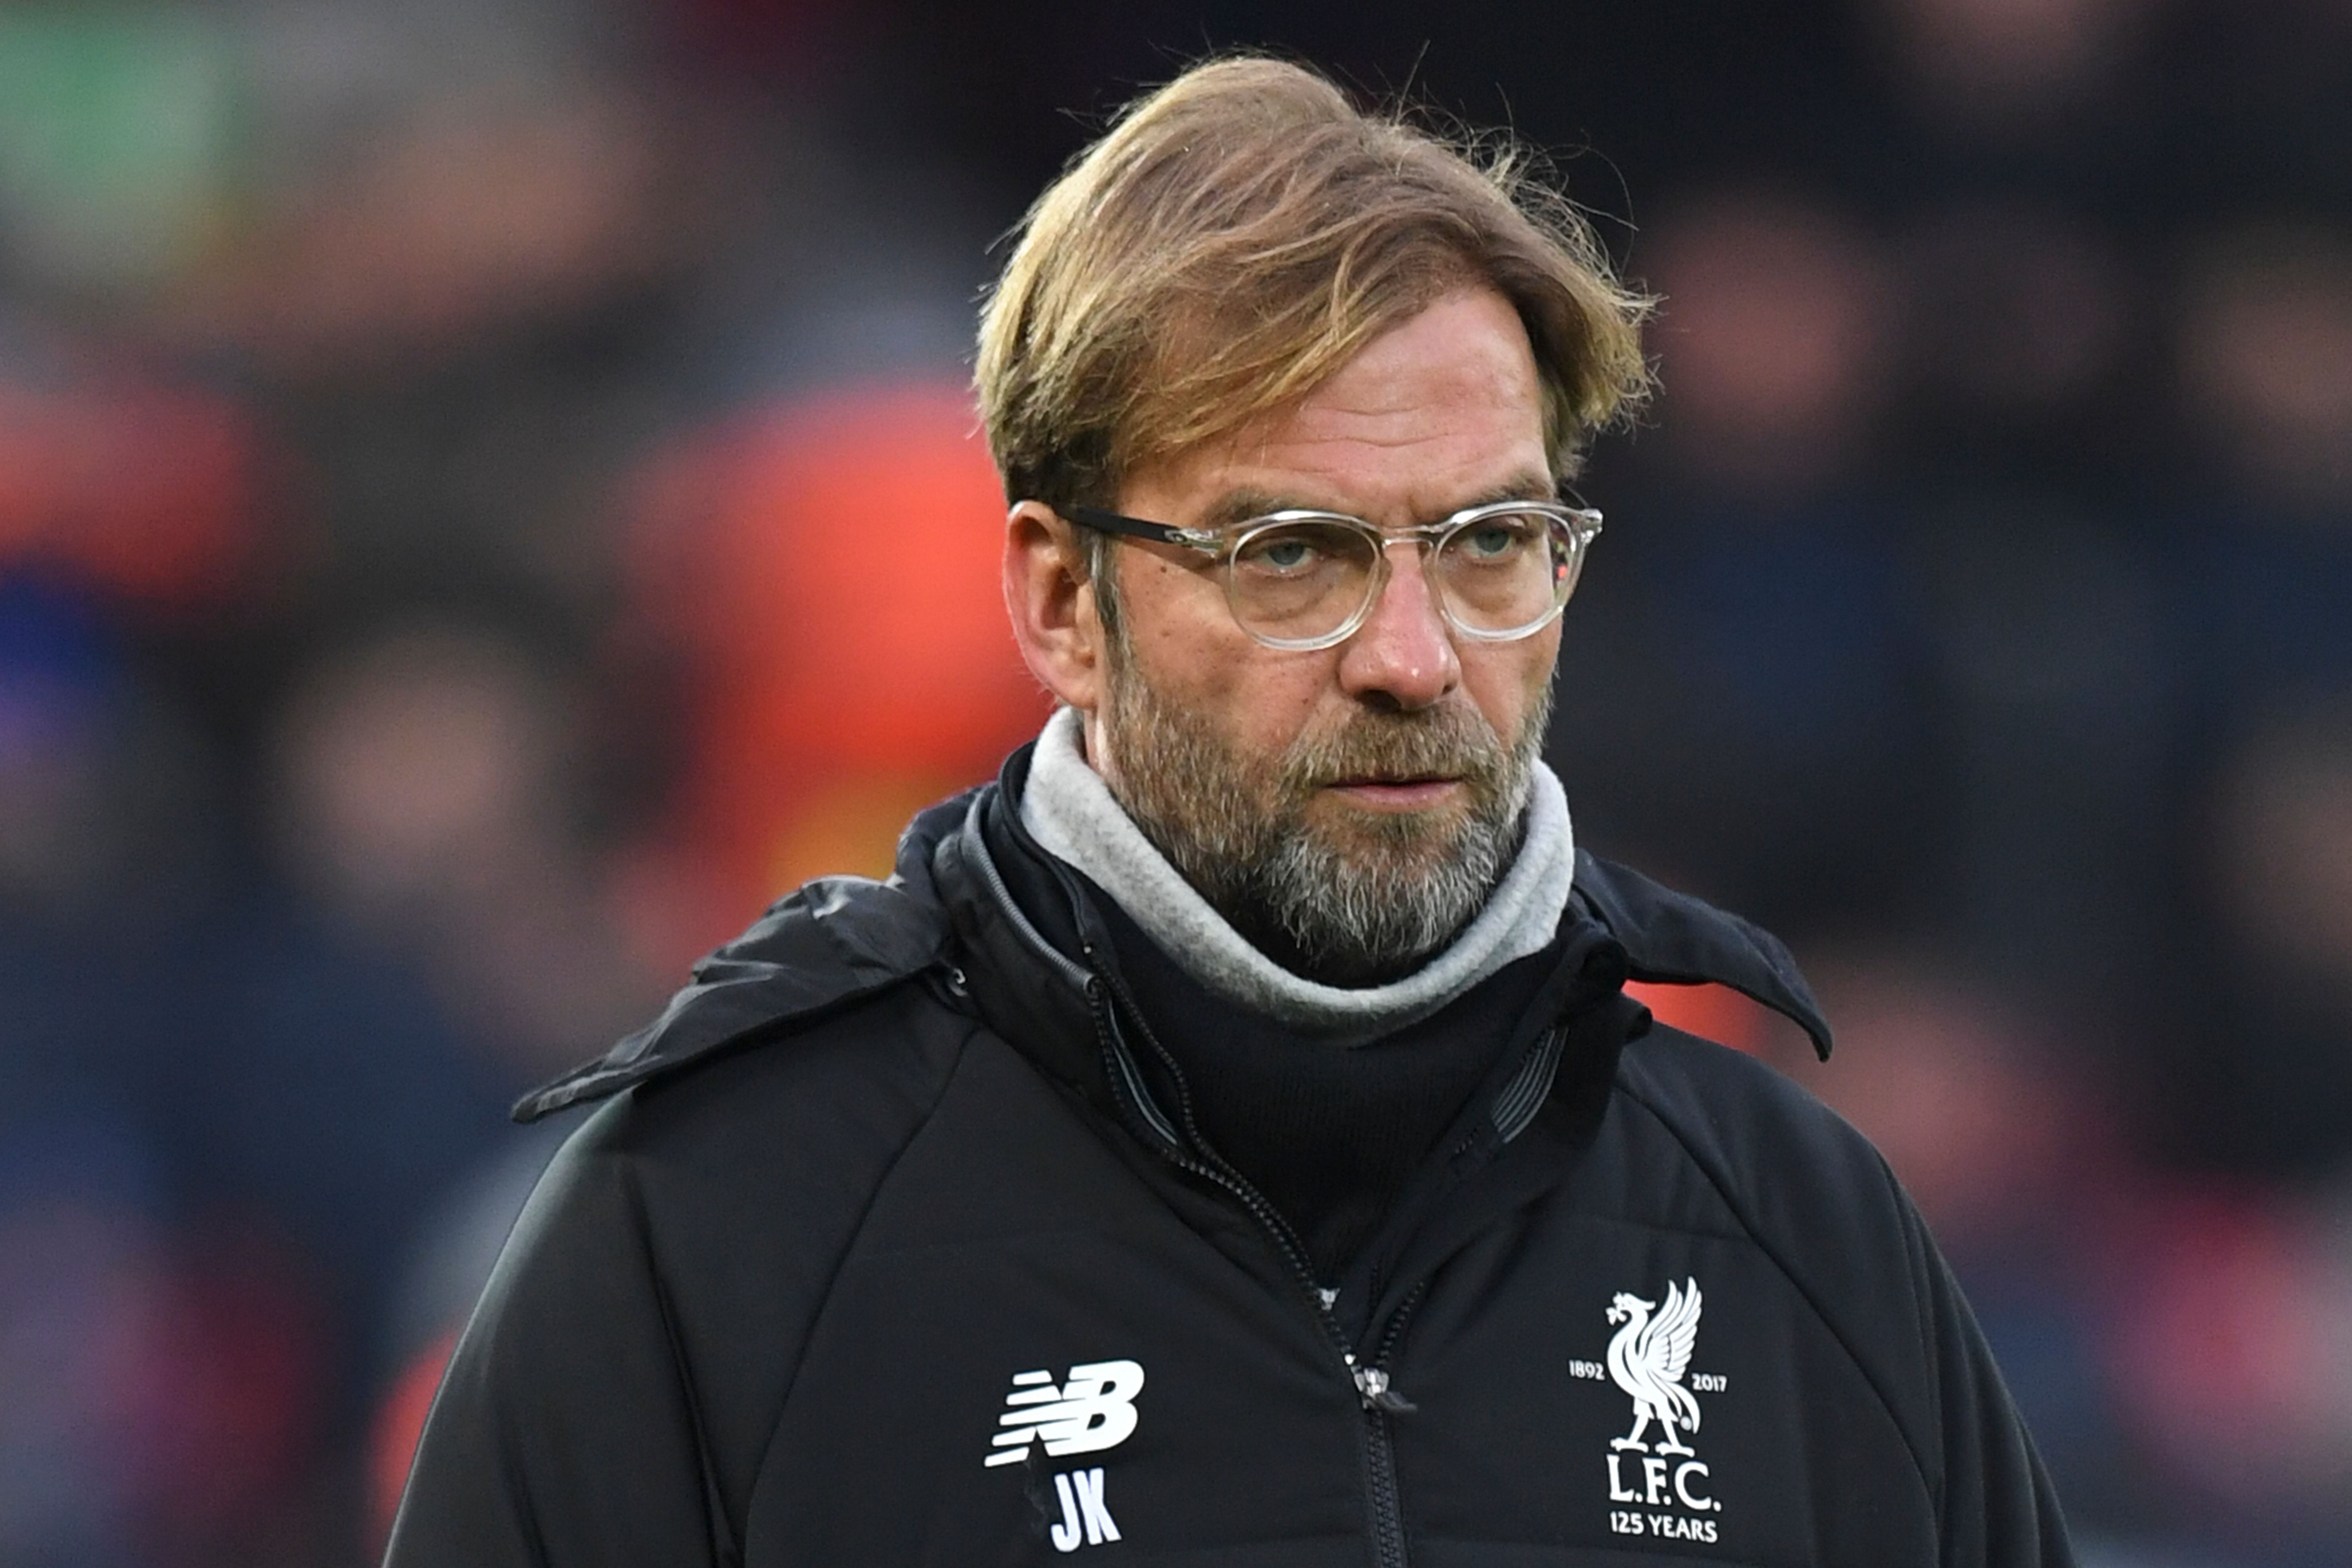 Liverpool's German manager Jurgen Klopp is seen ahead of the English Premier League football match between Liverpool and Everton at Anfield in Liverpool, north west England on December 10, 2017.  / AFP PHOTO / Paul ELLIS / RESTRICTED TO EDITORIAL USE. No use with unauthorized audio, video, data, fixture lists, club/league logos or 'live' services. Online in-match use limited to 75 images, no video emulation. No use in betting, games or single club/league/player publications.  /         (Photo credit should read PAUL ELLIS/AFP/Getty Images)